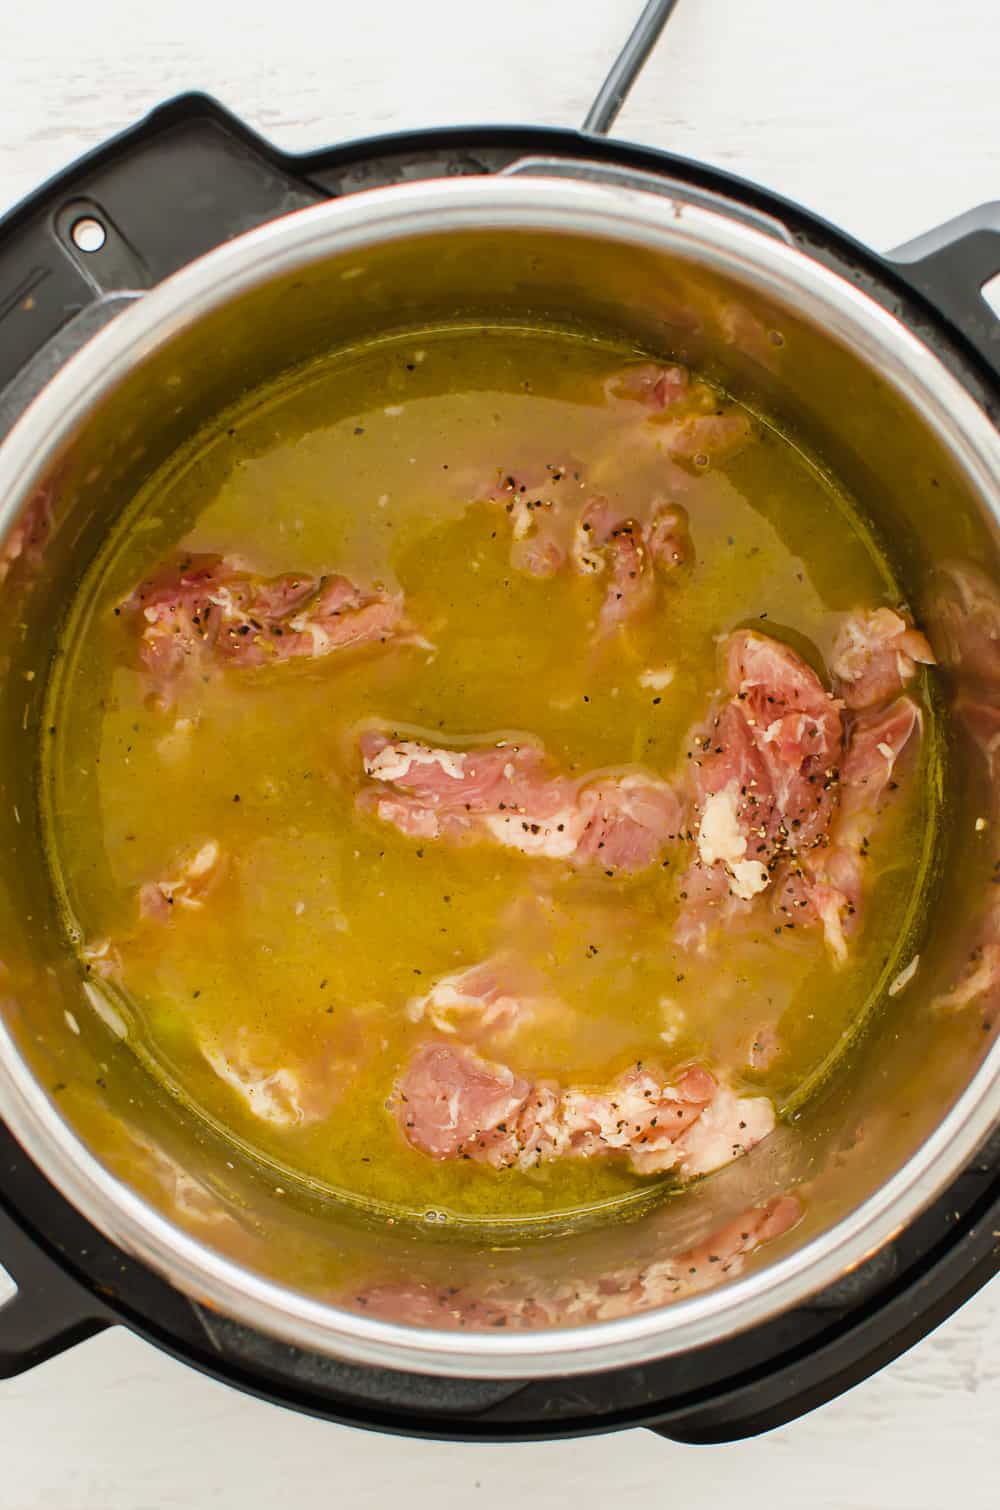 Broth and chicken thighs in the Instant Pot for chicken and dumplings.